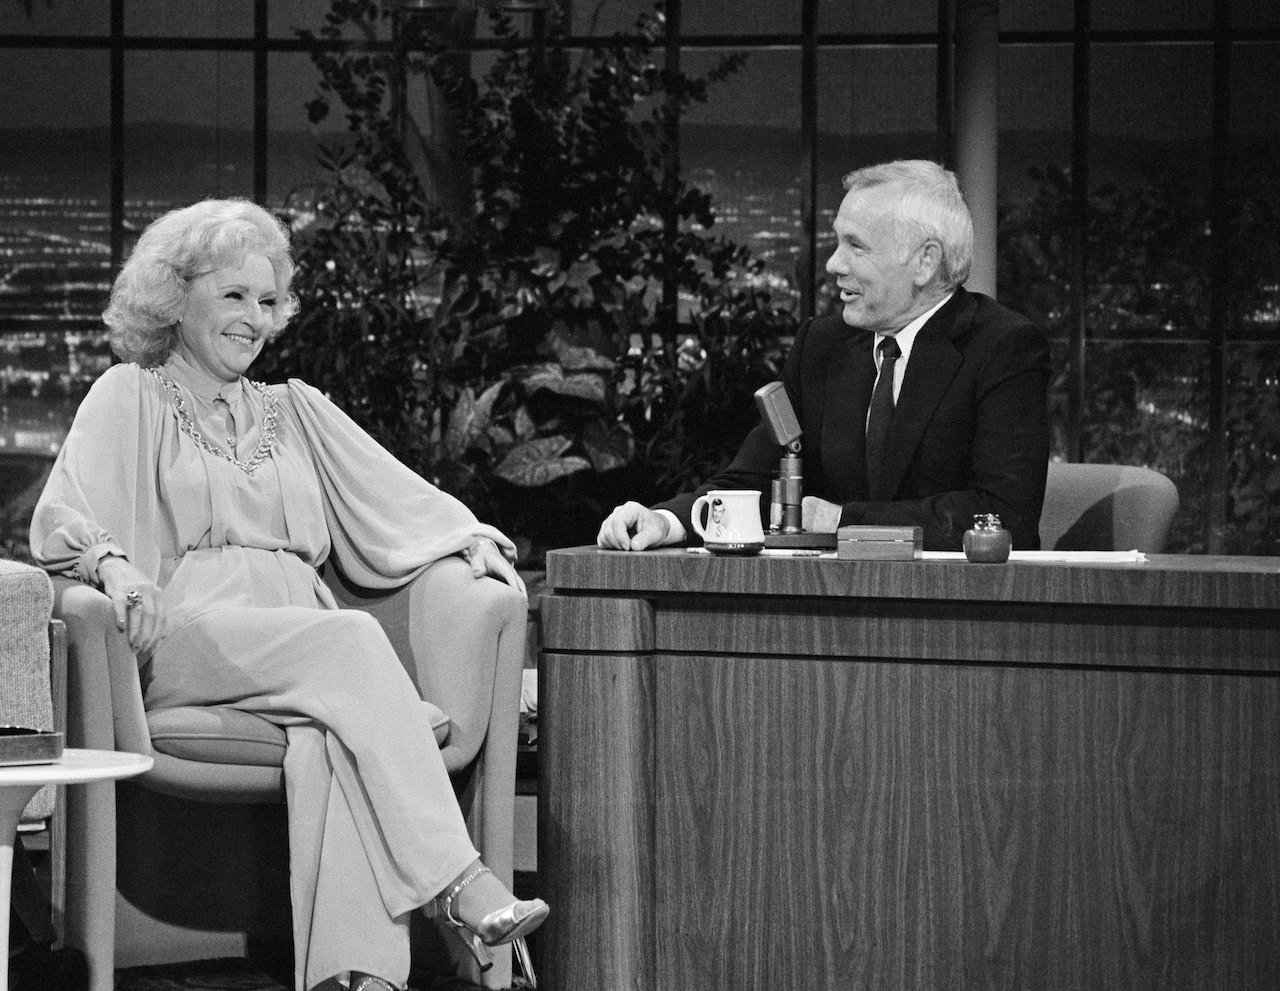 Betty White sits in the guest chair at 'The Tonight Show' with Johnny Carson behind the desk.